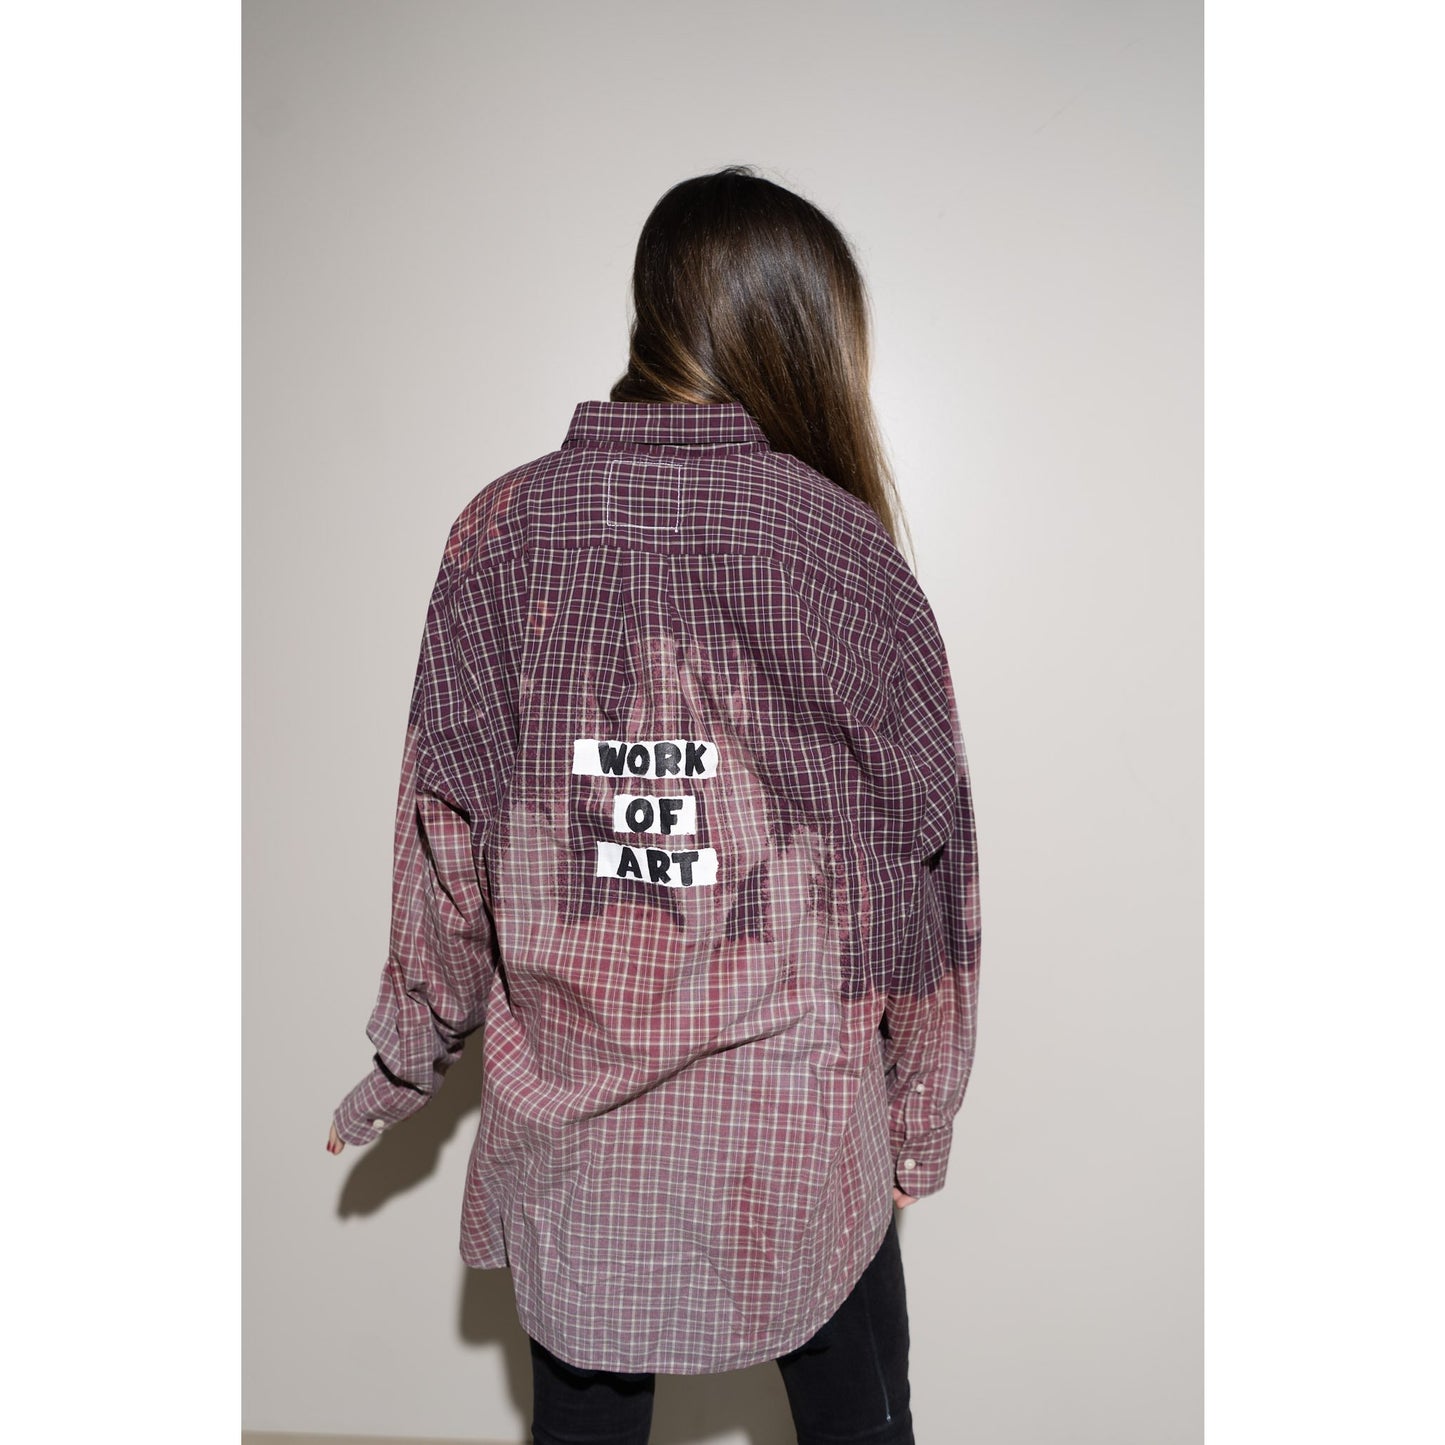 WOA | HAND DYED FLANNEL 23